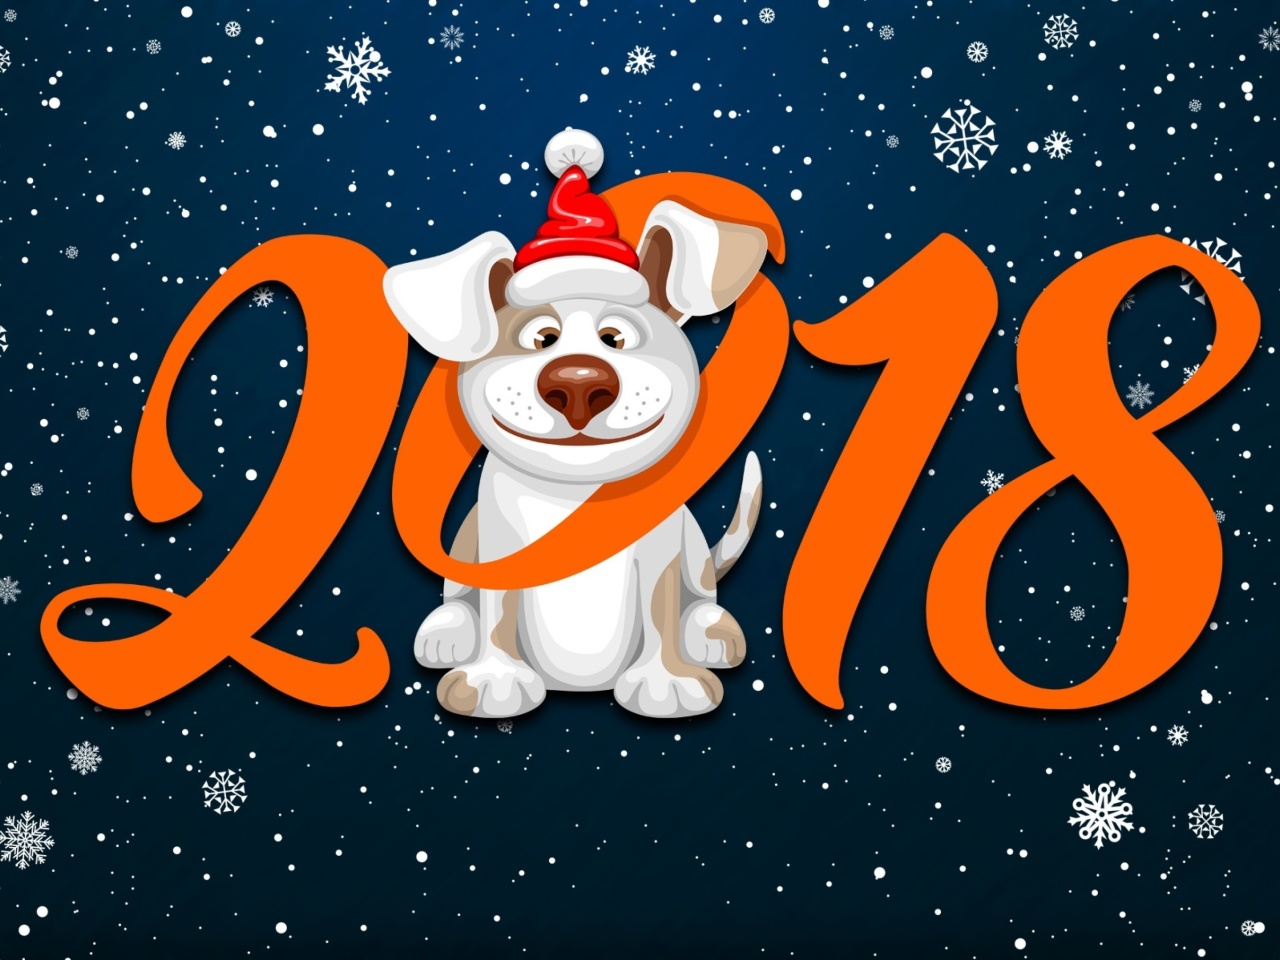 Das New Year Dog 2018 with Snow Wallpaper 1280x960